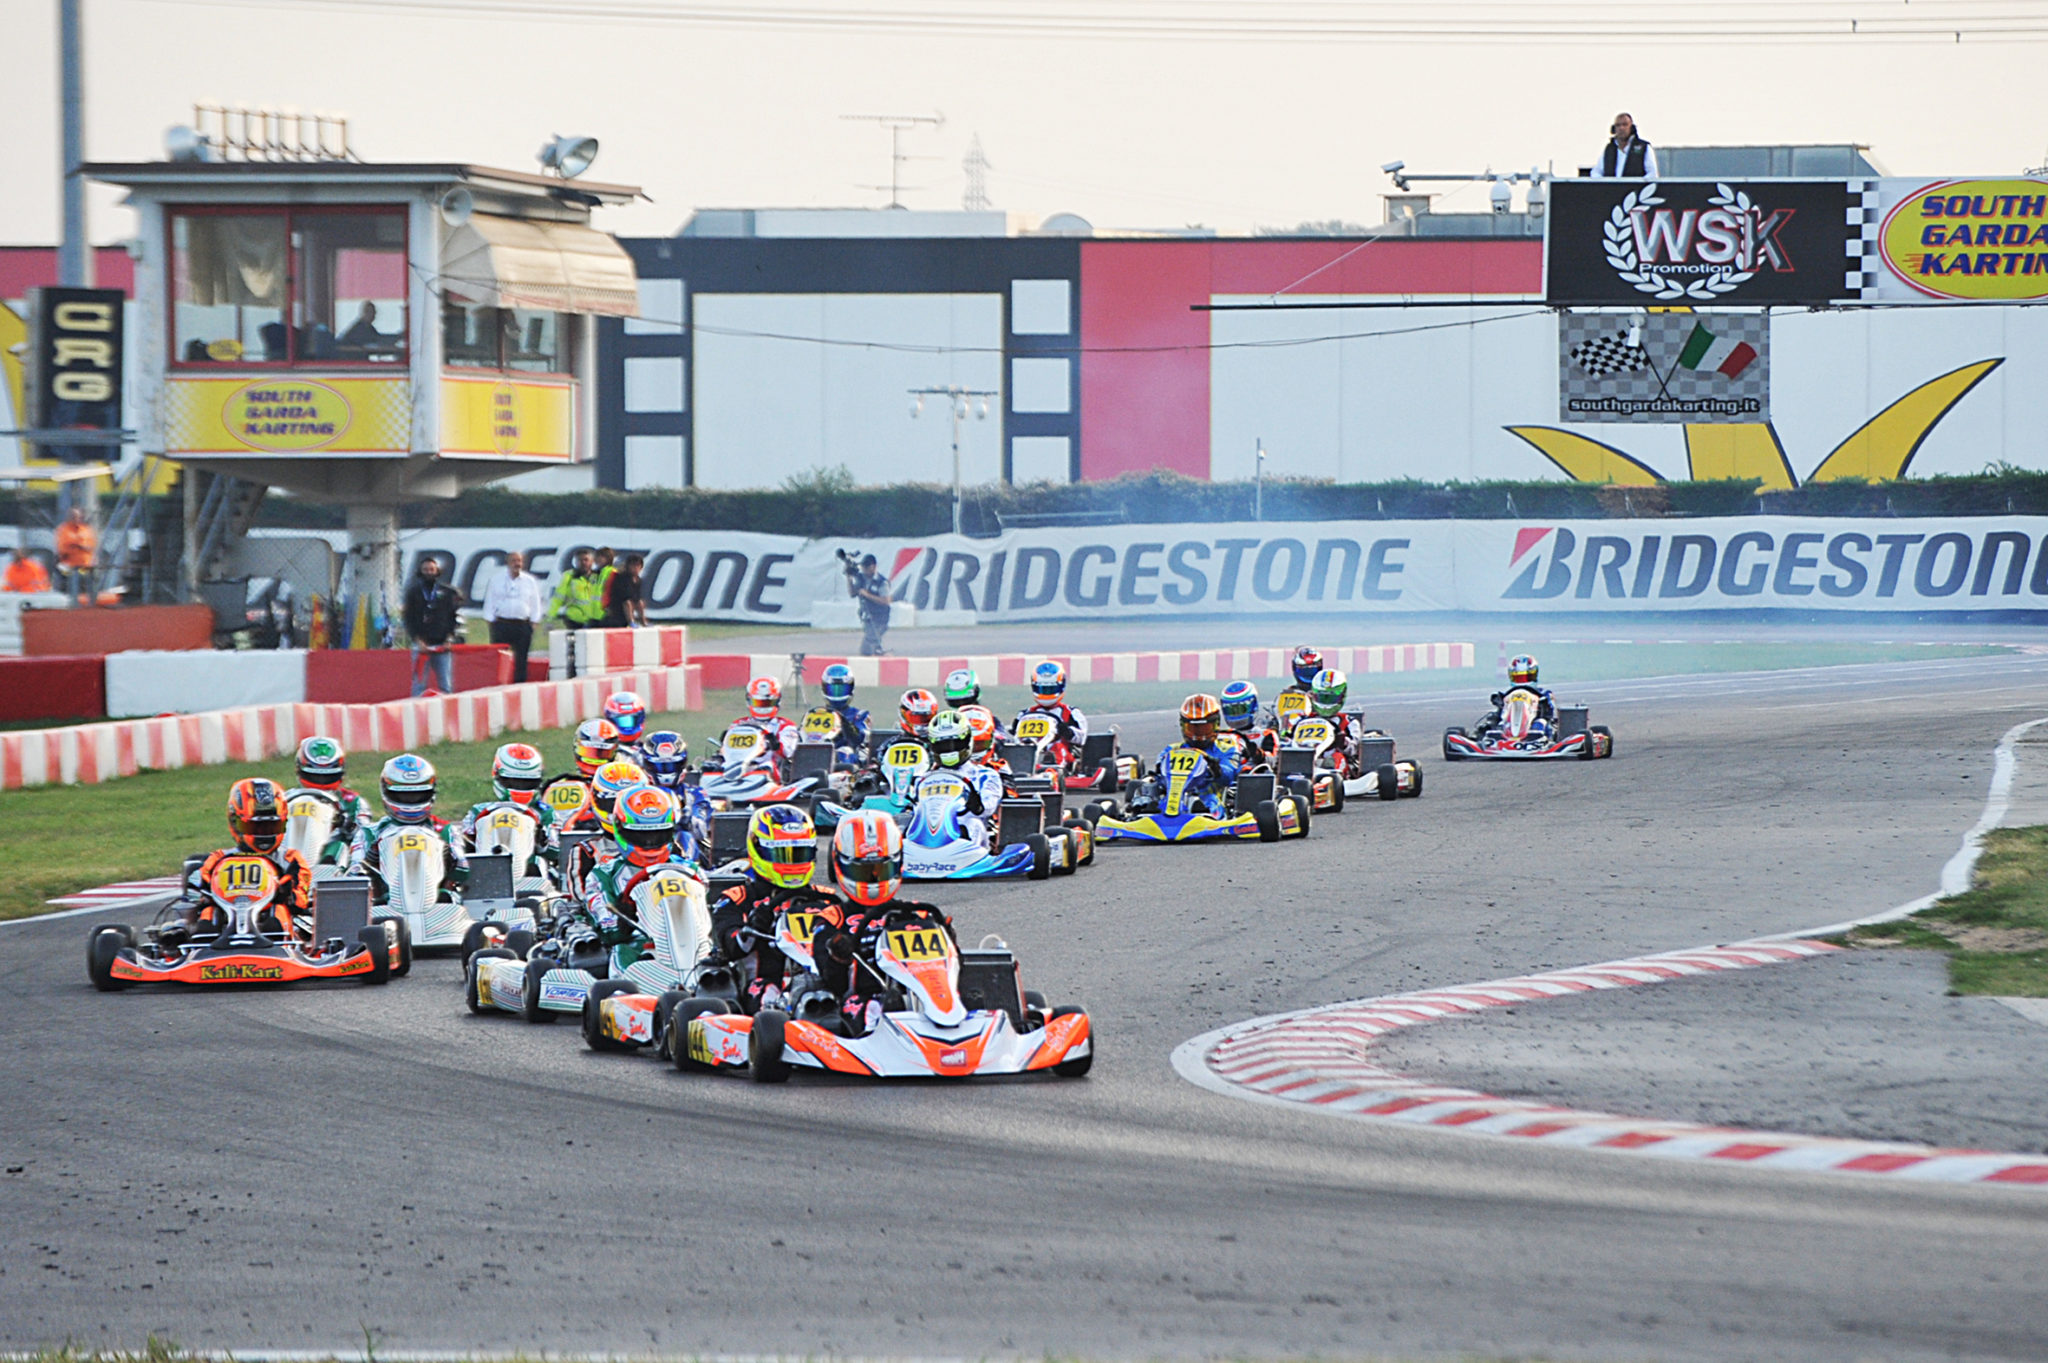 WSK Final Cup – Round 1 : Friday Qualifying Recap